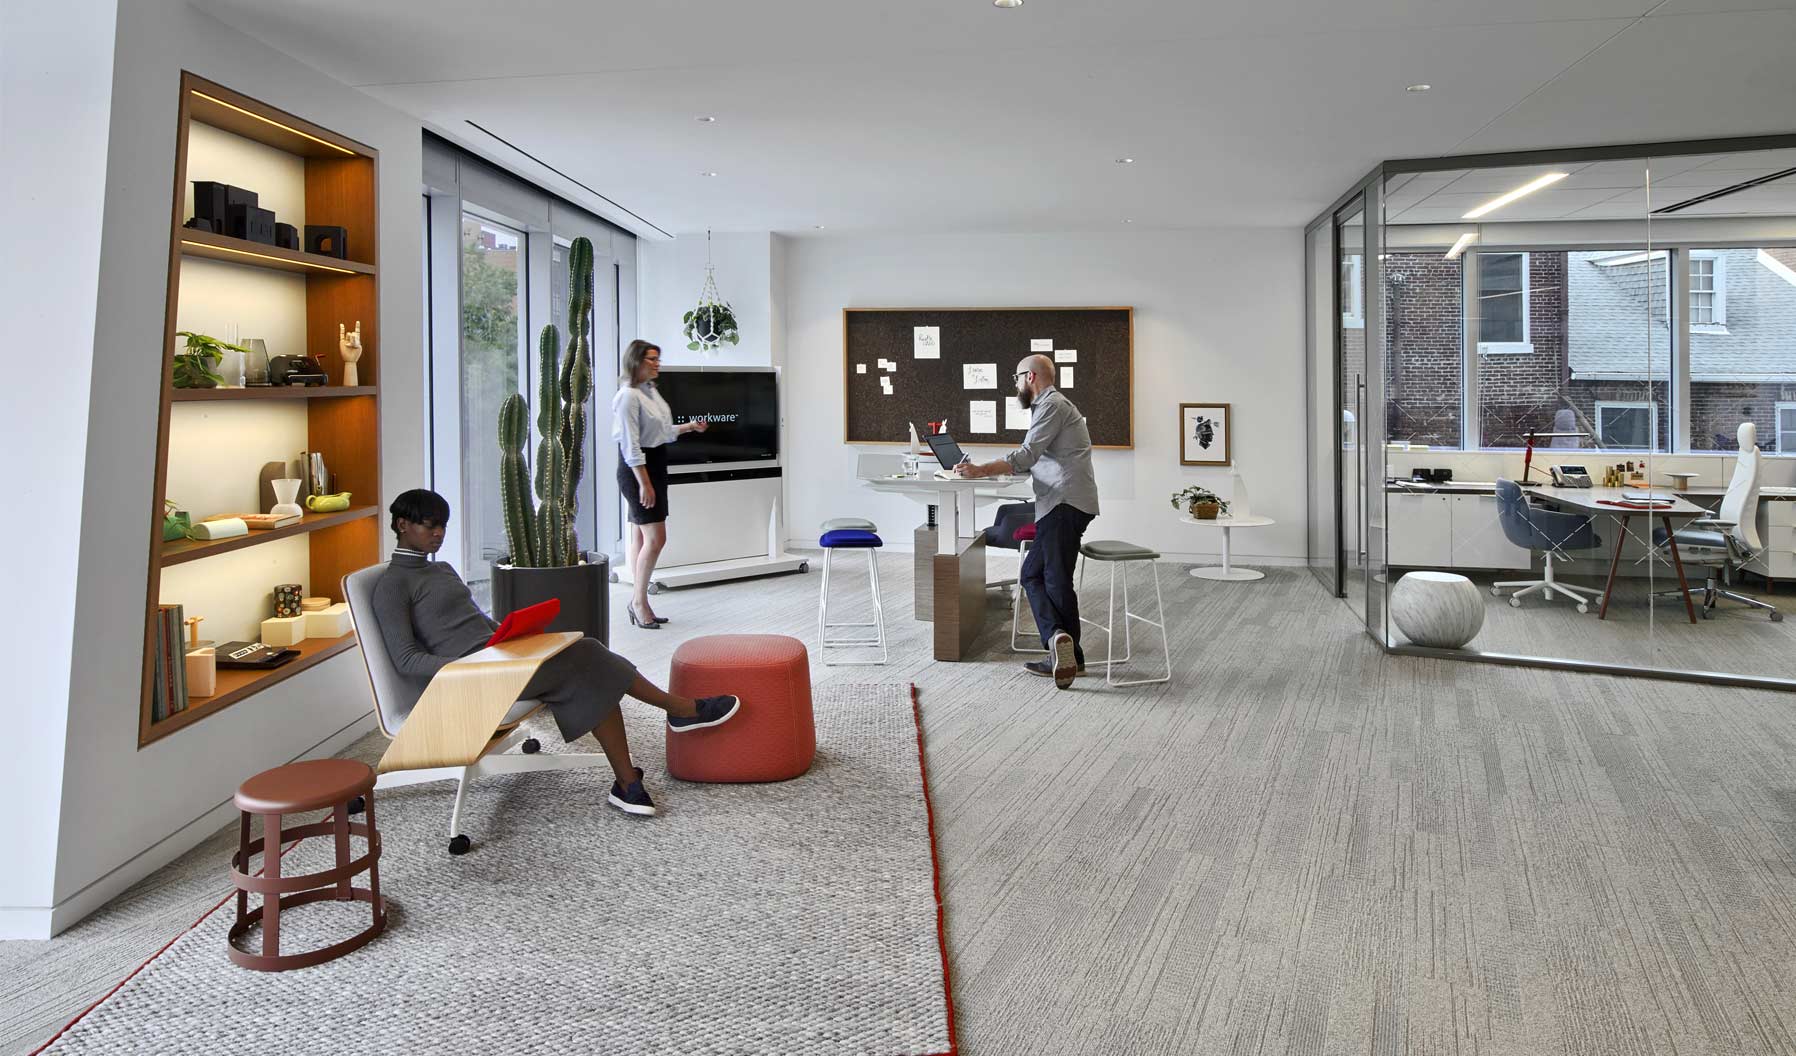 This Social Space demonstrates how a zone can be layered with various postures and become an effective collaboration tool for the entire office. Anchored at the end of the floor plate with both technology and tactile pin up space, and adjacent to both private offices and workstations, it’s a spot where multiple people can efficiently come together to collaborate in the open office.